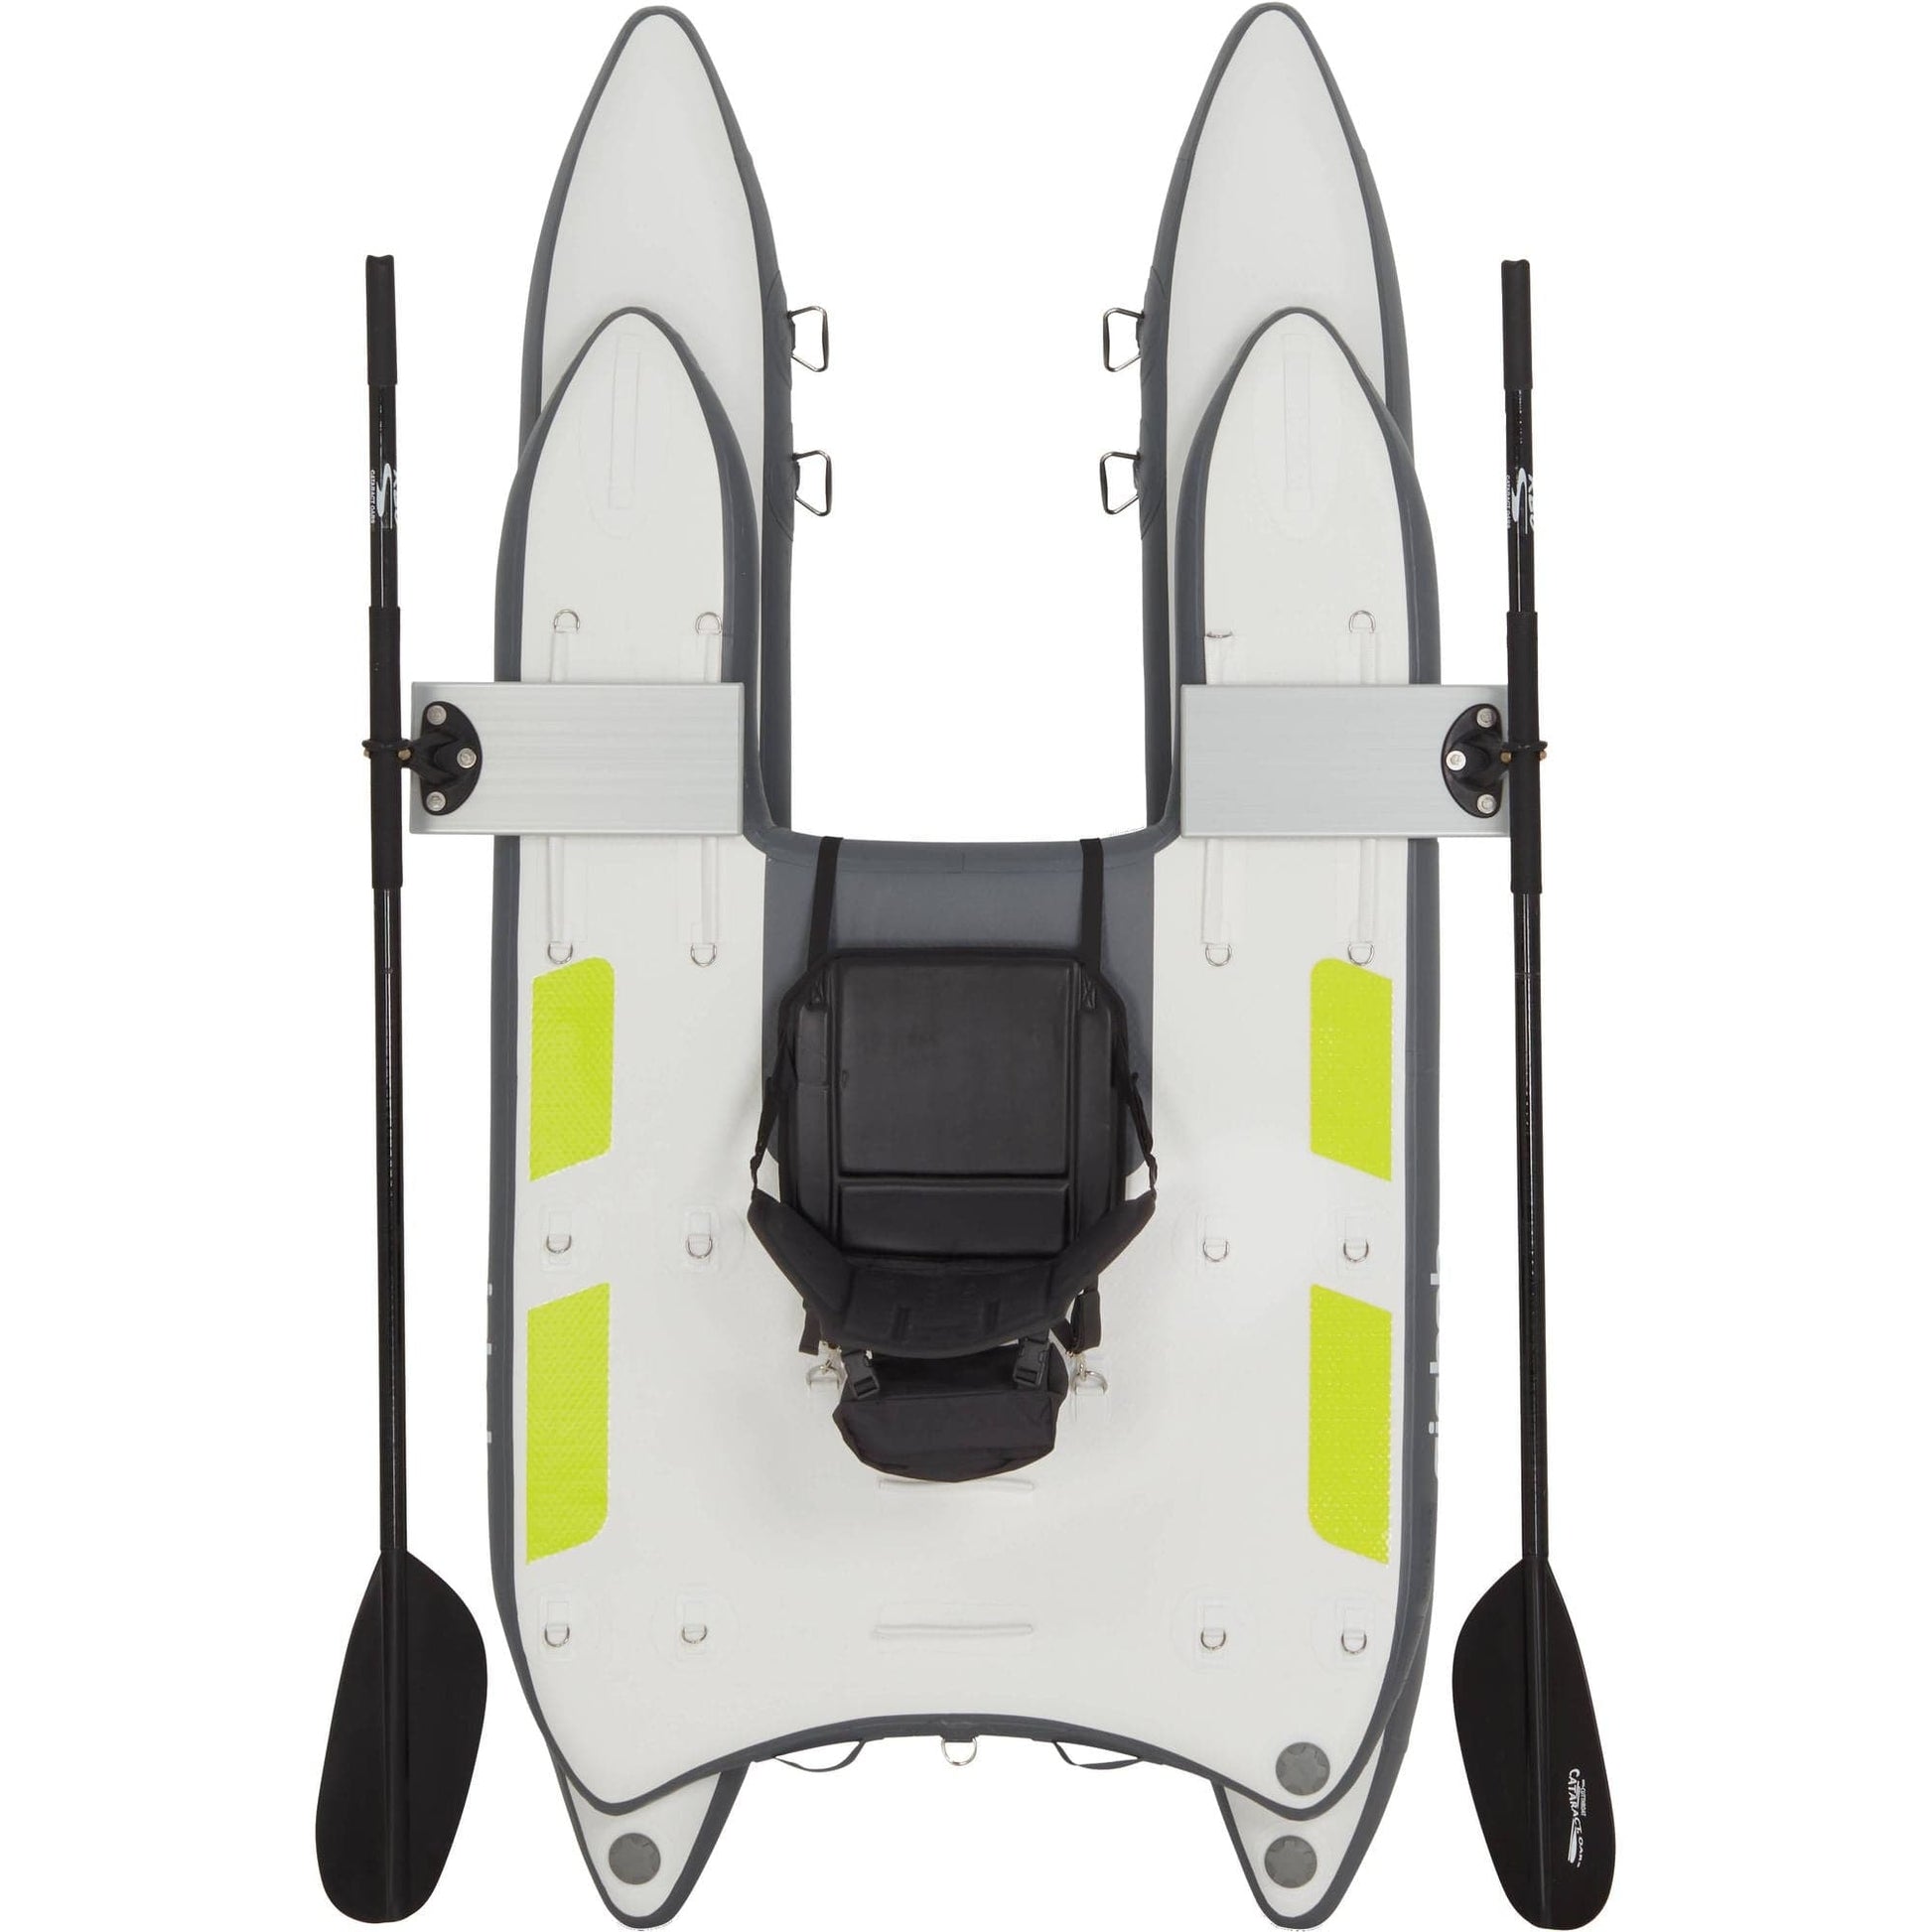 Featuring the GigBob 2.0 cataraft, fishing kayak, inflatable kayak manufactured by NRS shown here from a second angle.